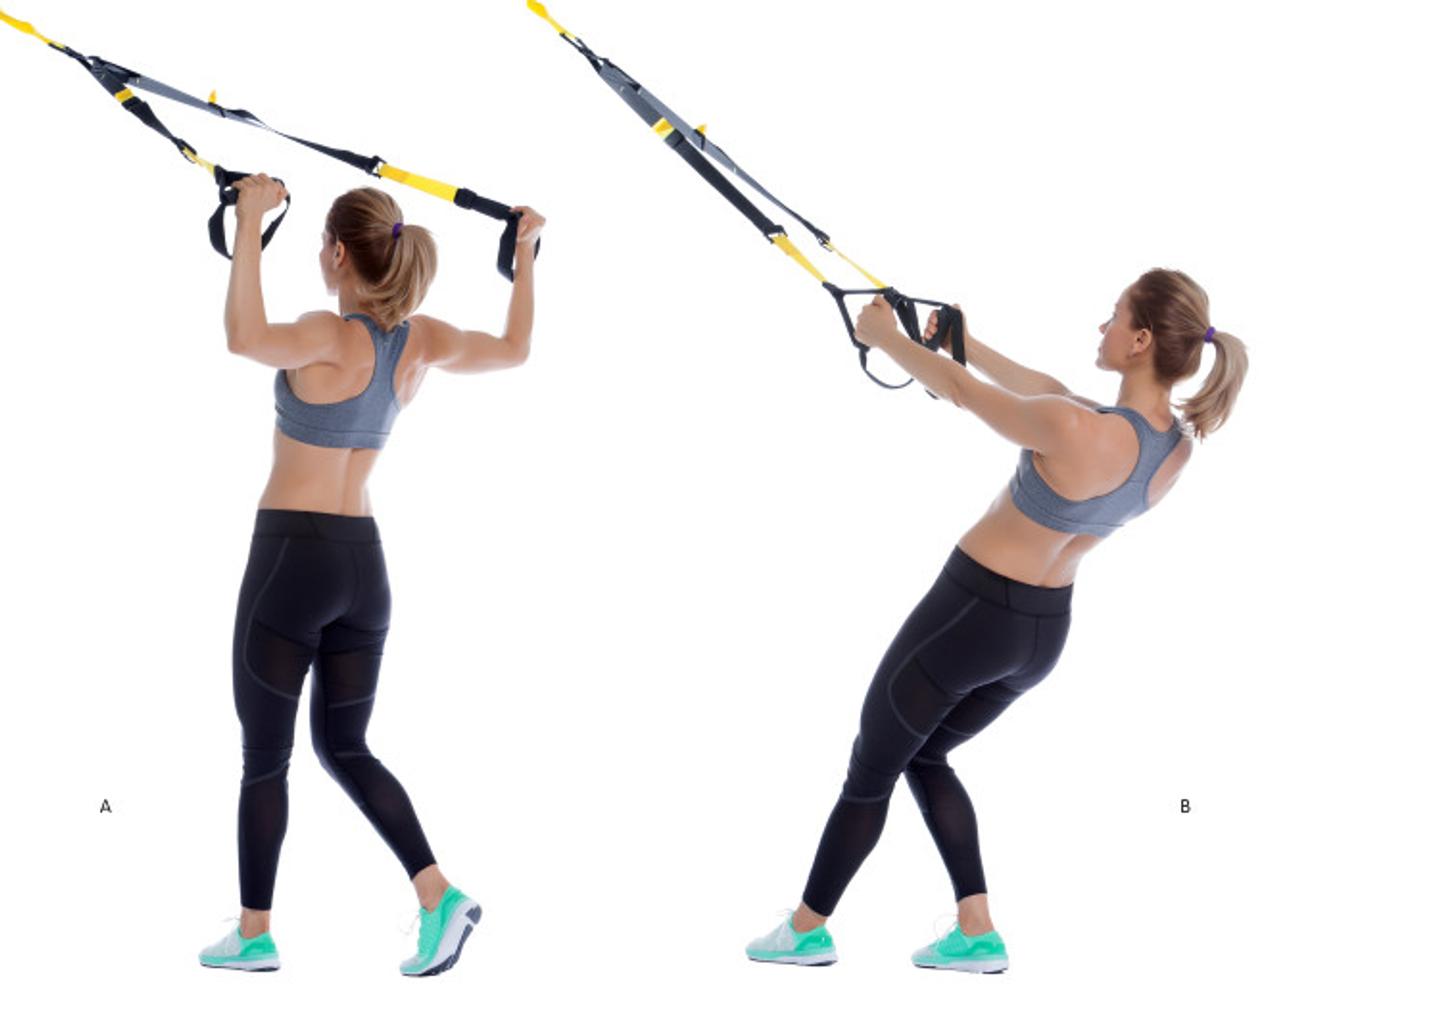 ISSA, International Sports Sciences Association, Certified Personal Trainer, ISSAonline, ISSA x TRX: Best TRX Exercises to Enhance Your Training High Row